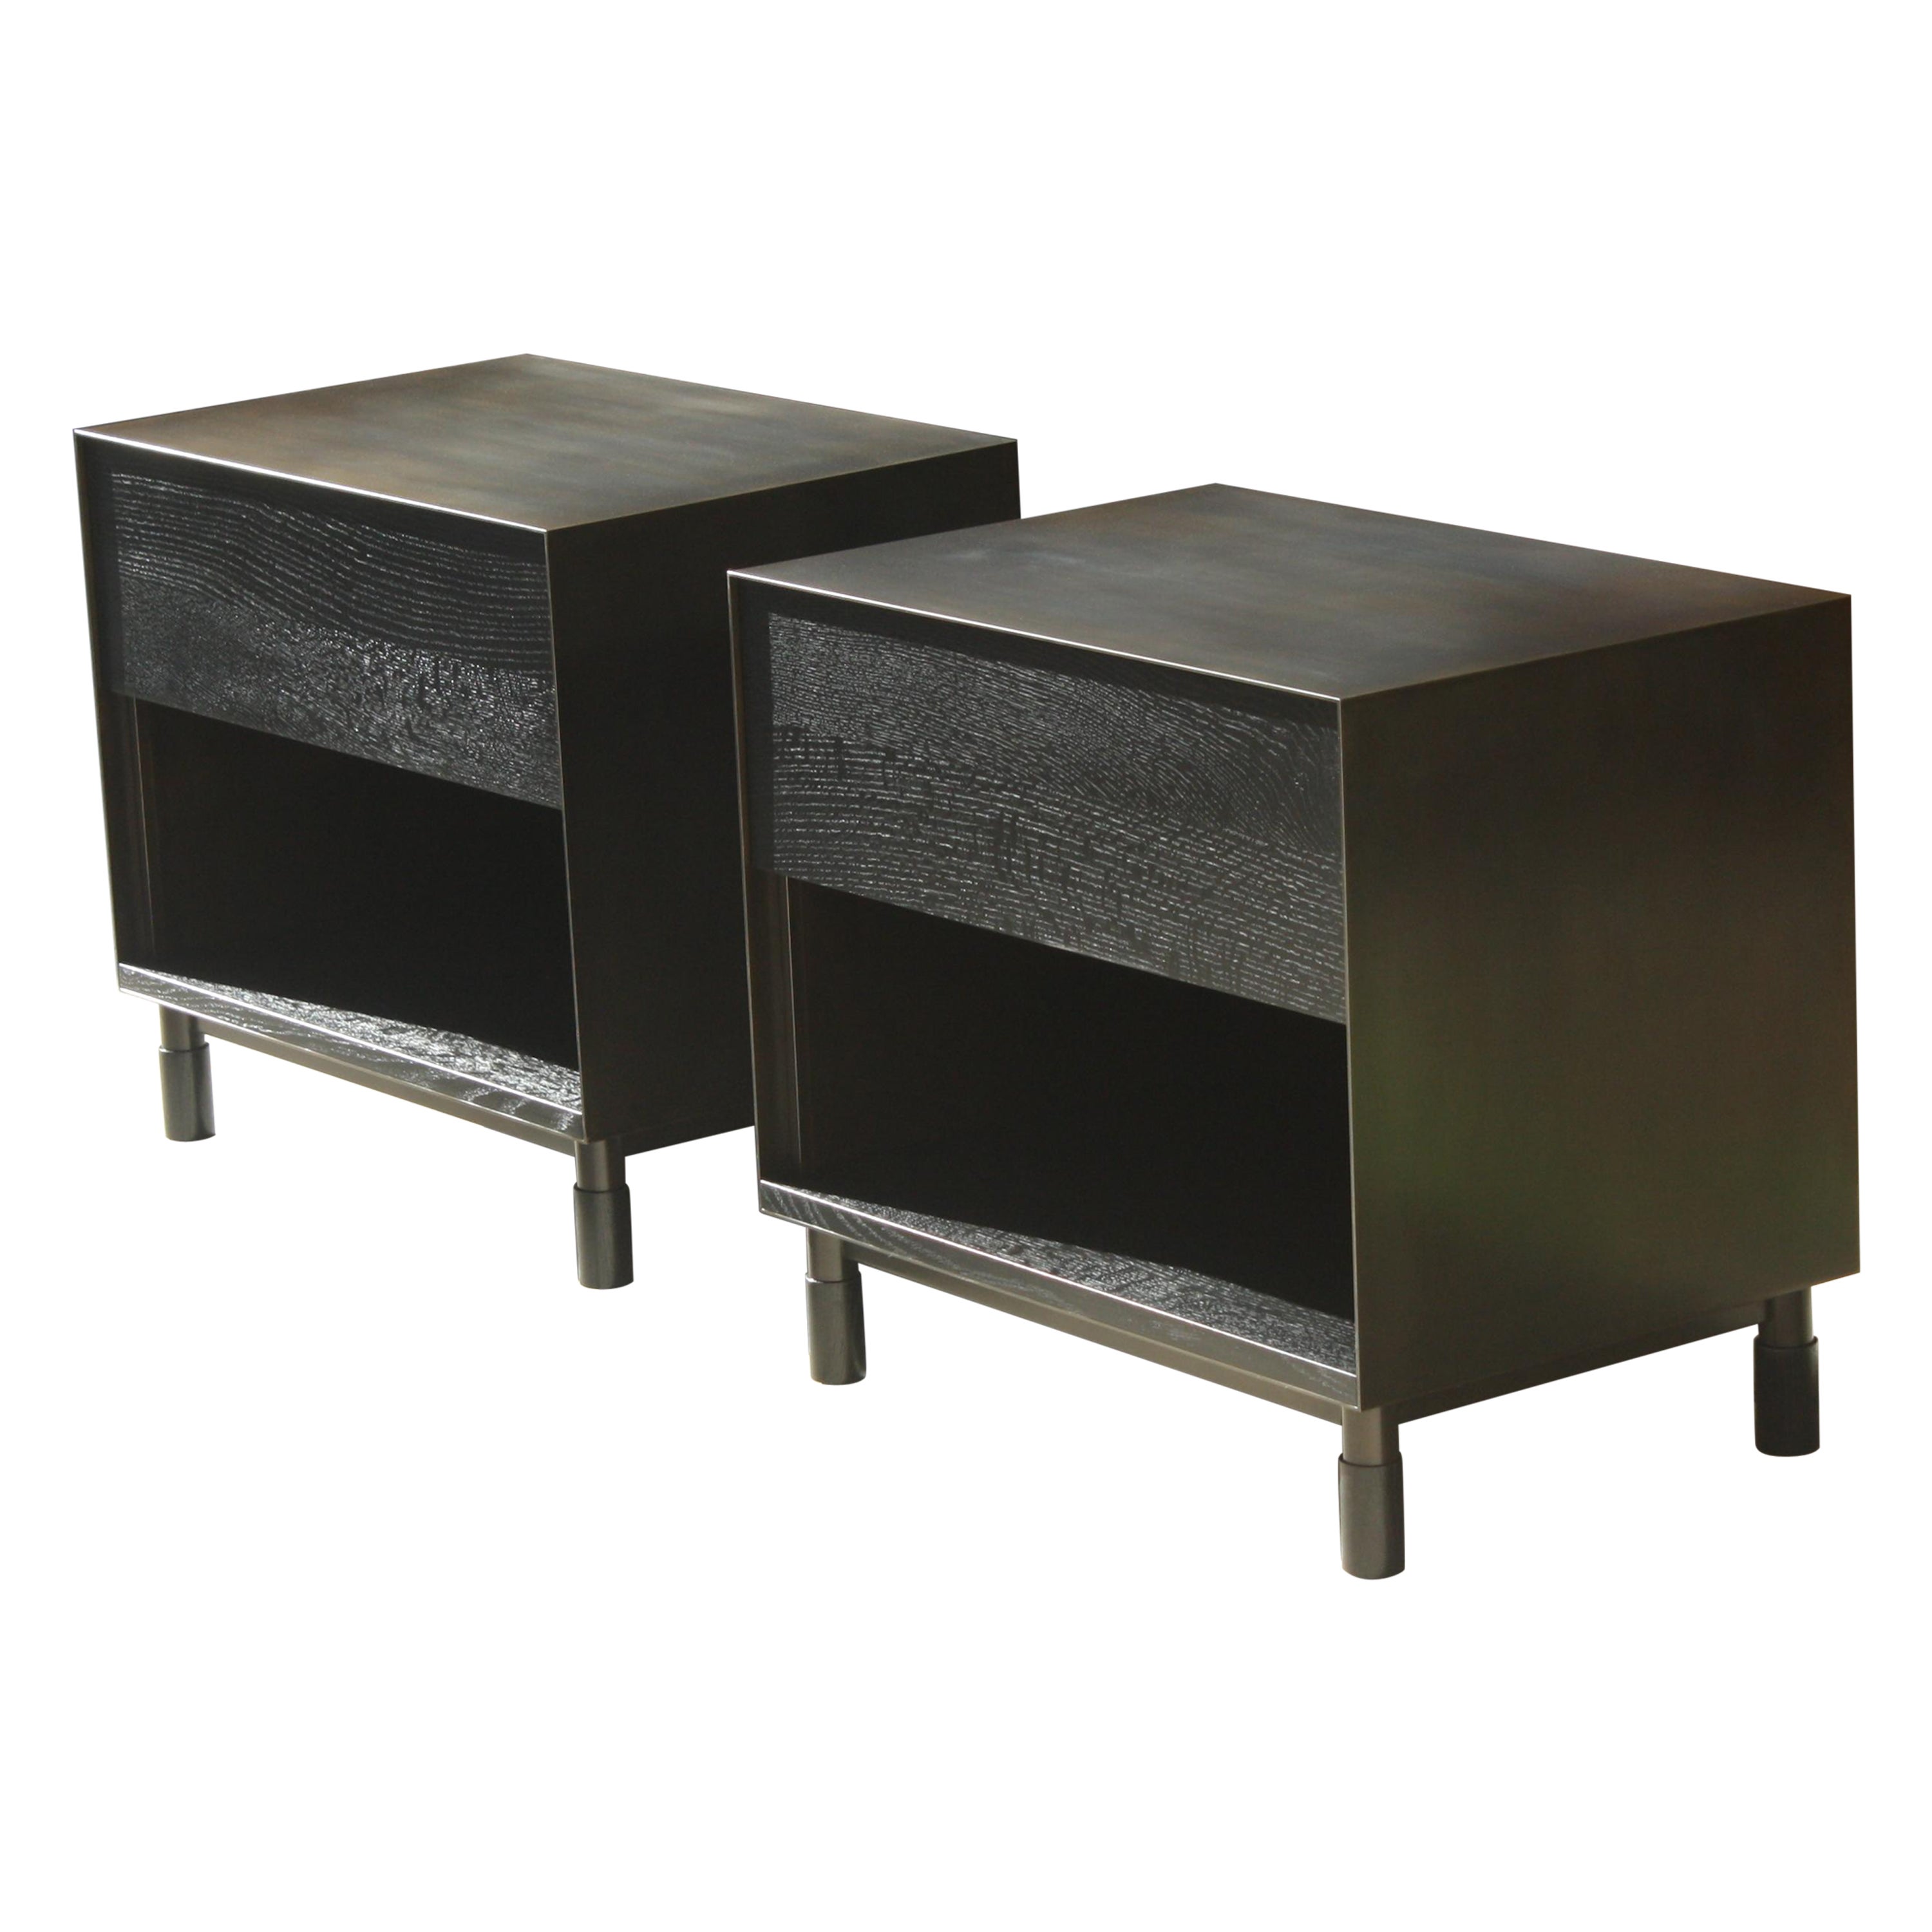 Oxide Matching Side Cabinets Handmade by Laylo Studio in Solid Wood and Metal